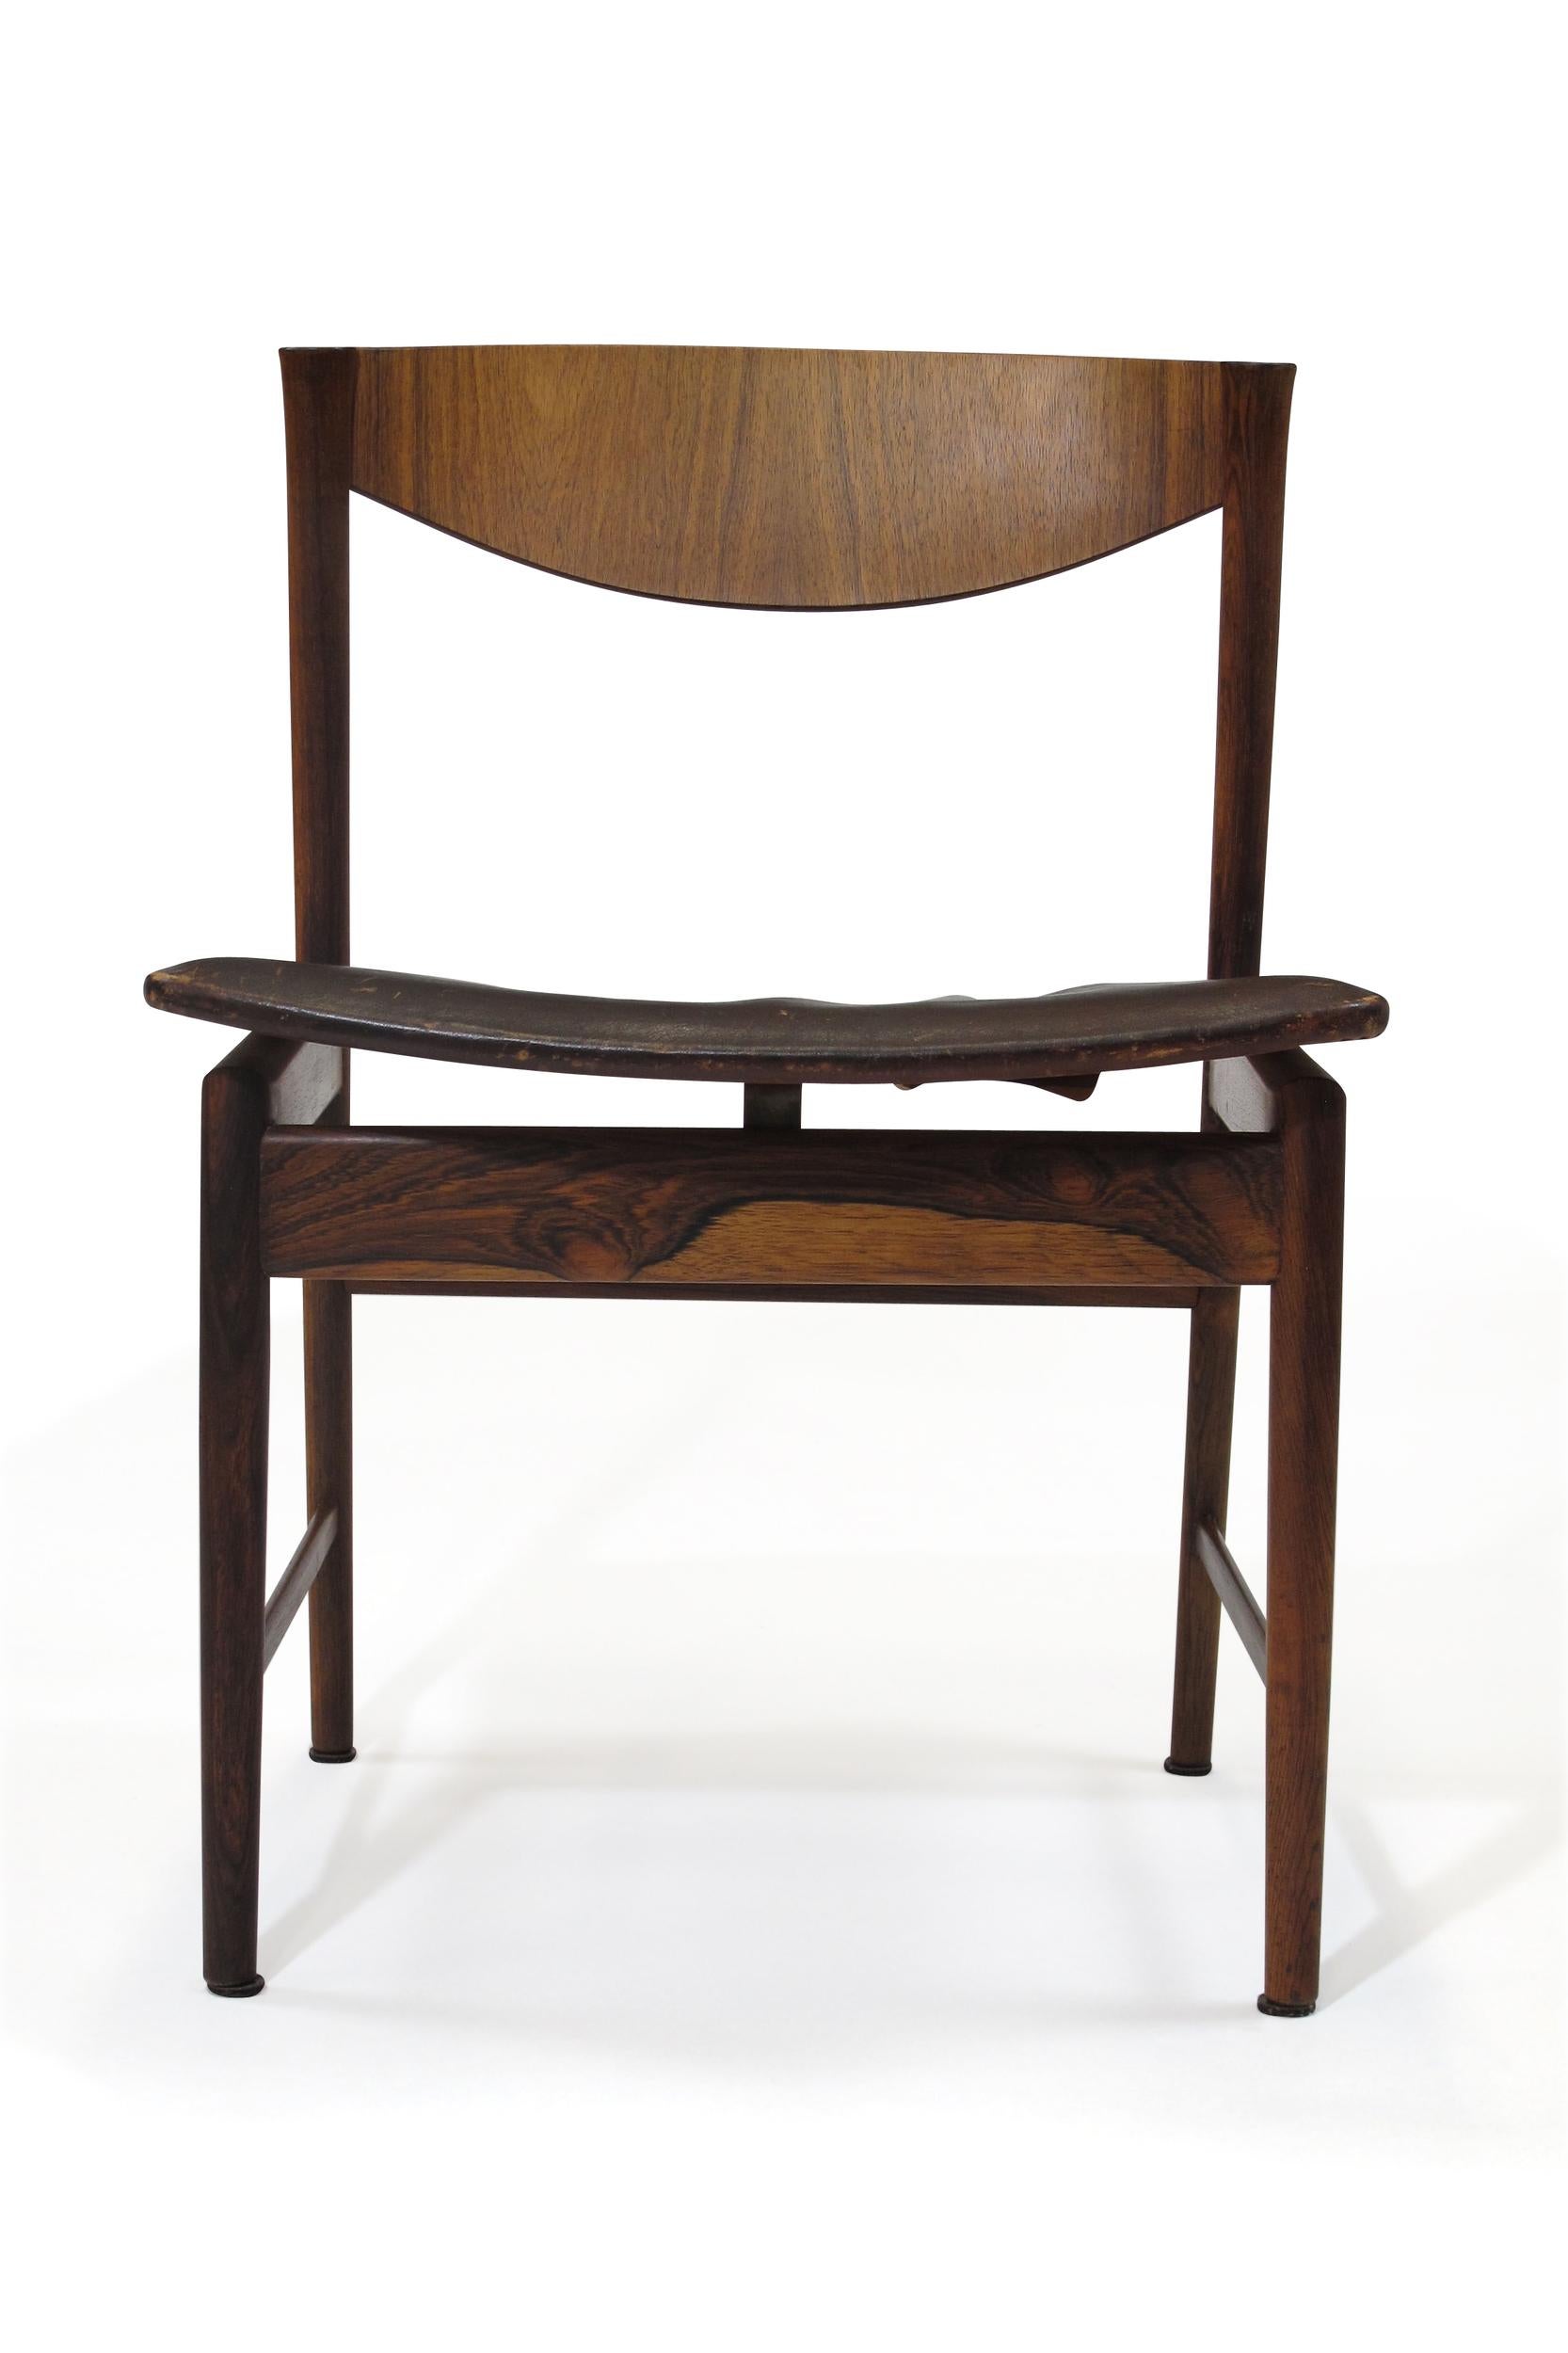 Rare set of eight solid Brazilian rosewood dining chairs designed by I.B Kofoed Larsen for Saffle Mobelfabrik Sweden. Features solid Brazilian Rosewood frames with rich grain and exquisite joinery. The floating seats are raised on an elegant frame